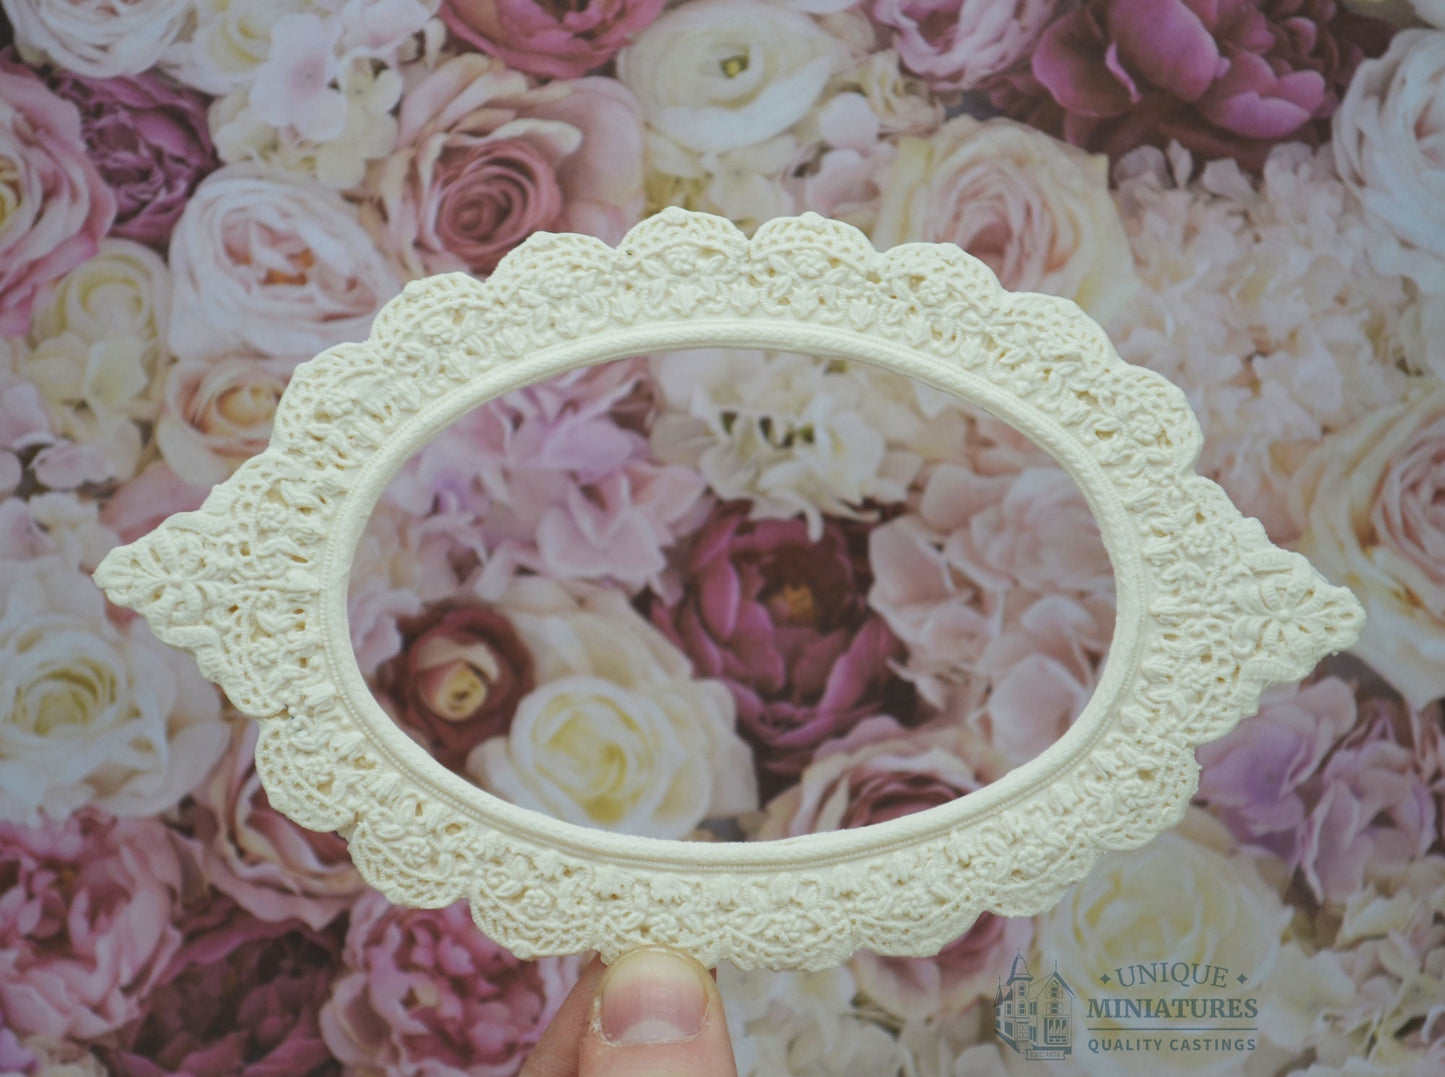 Lacy Oval Ceiling Carving | Ornamentation for Dollhouse Miniatures